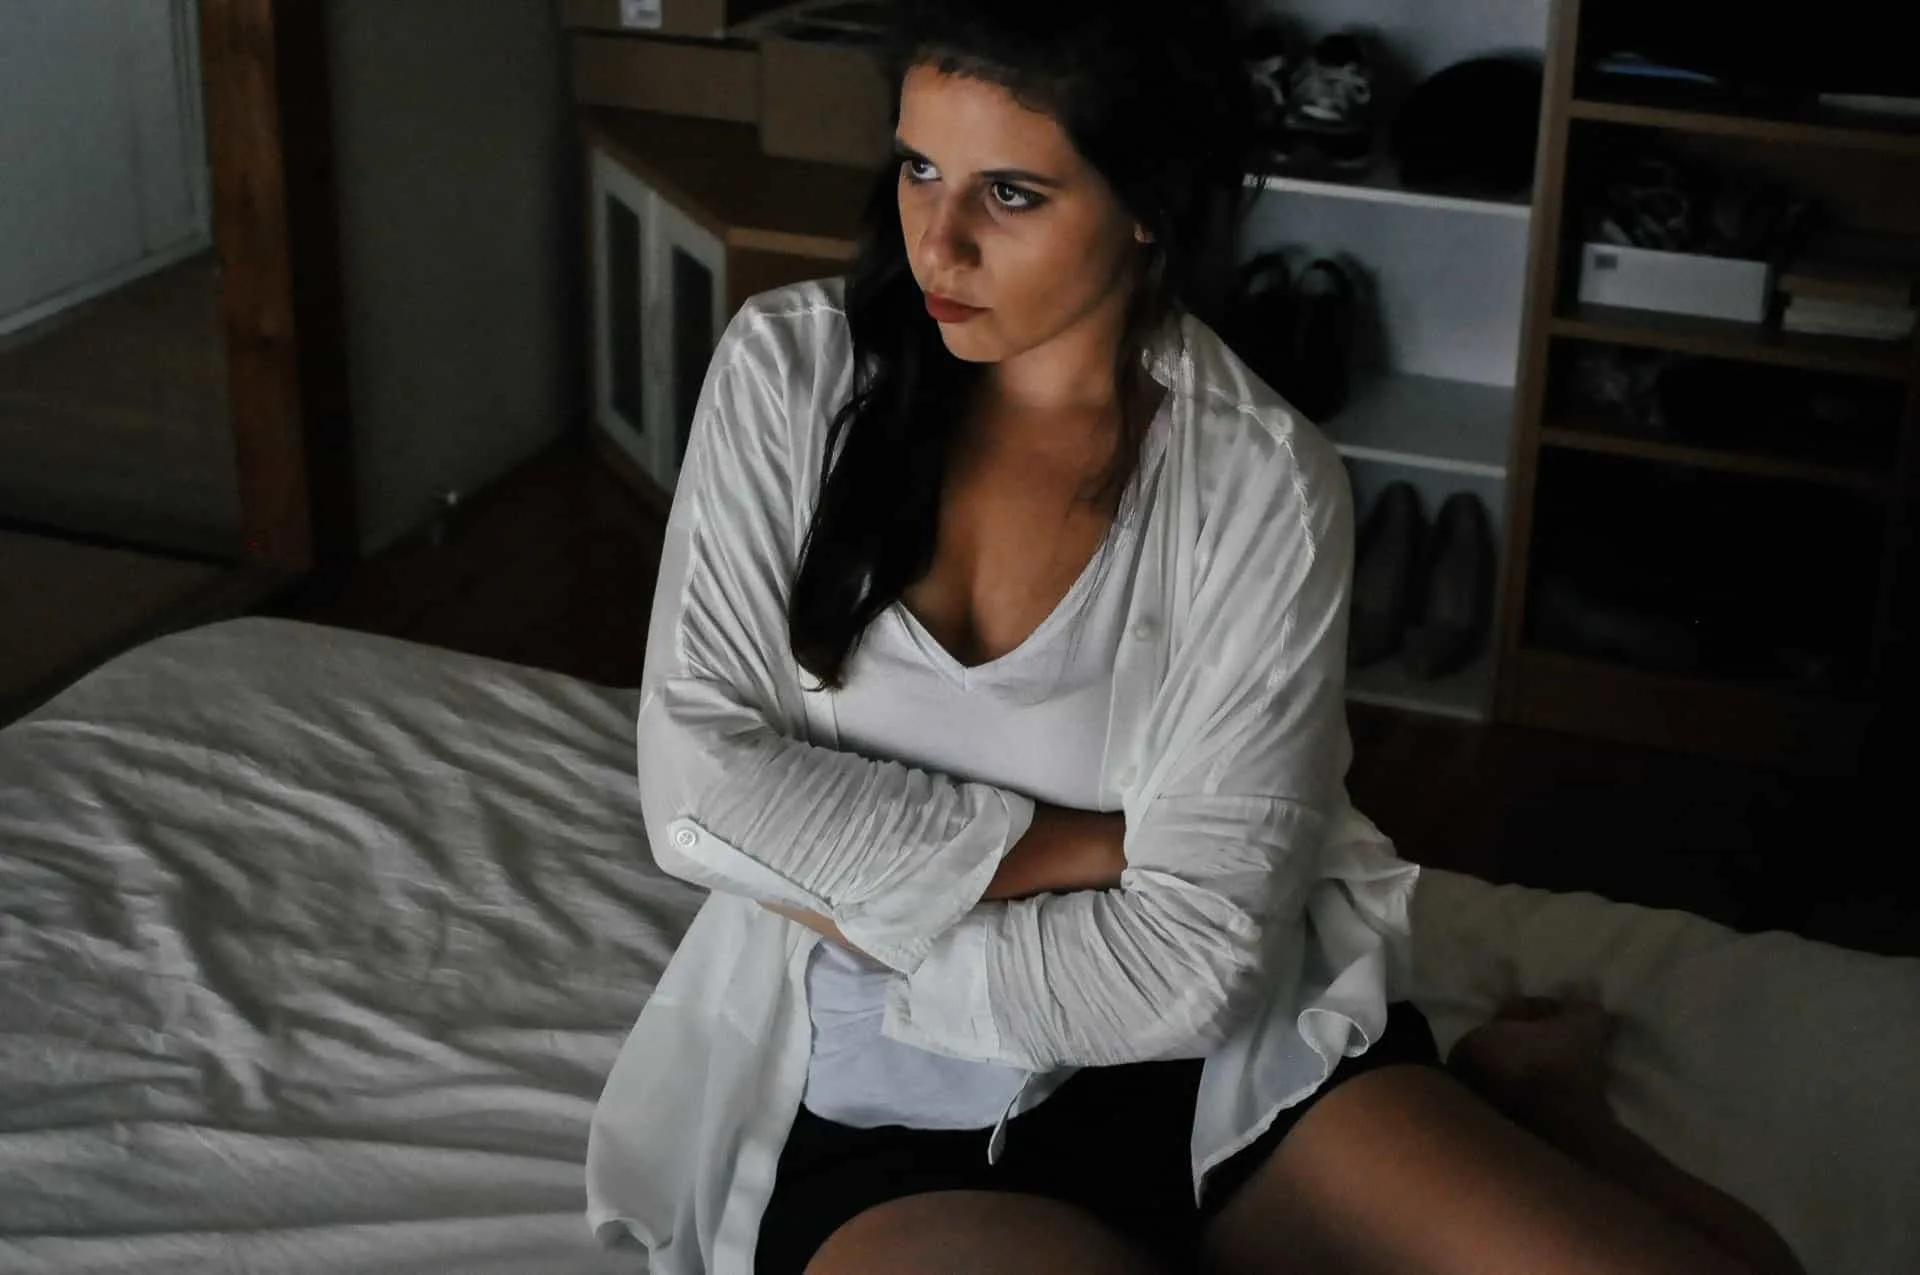 upset woman sitting on bed wearing white top